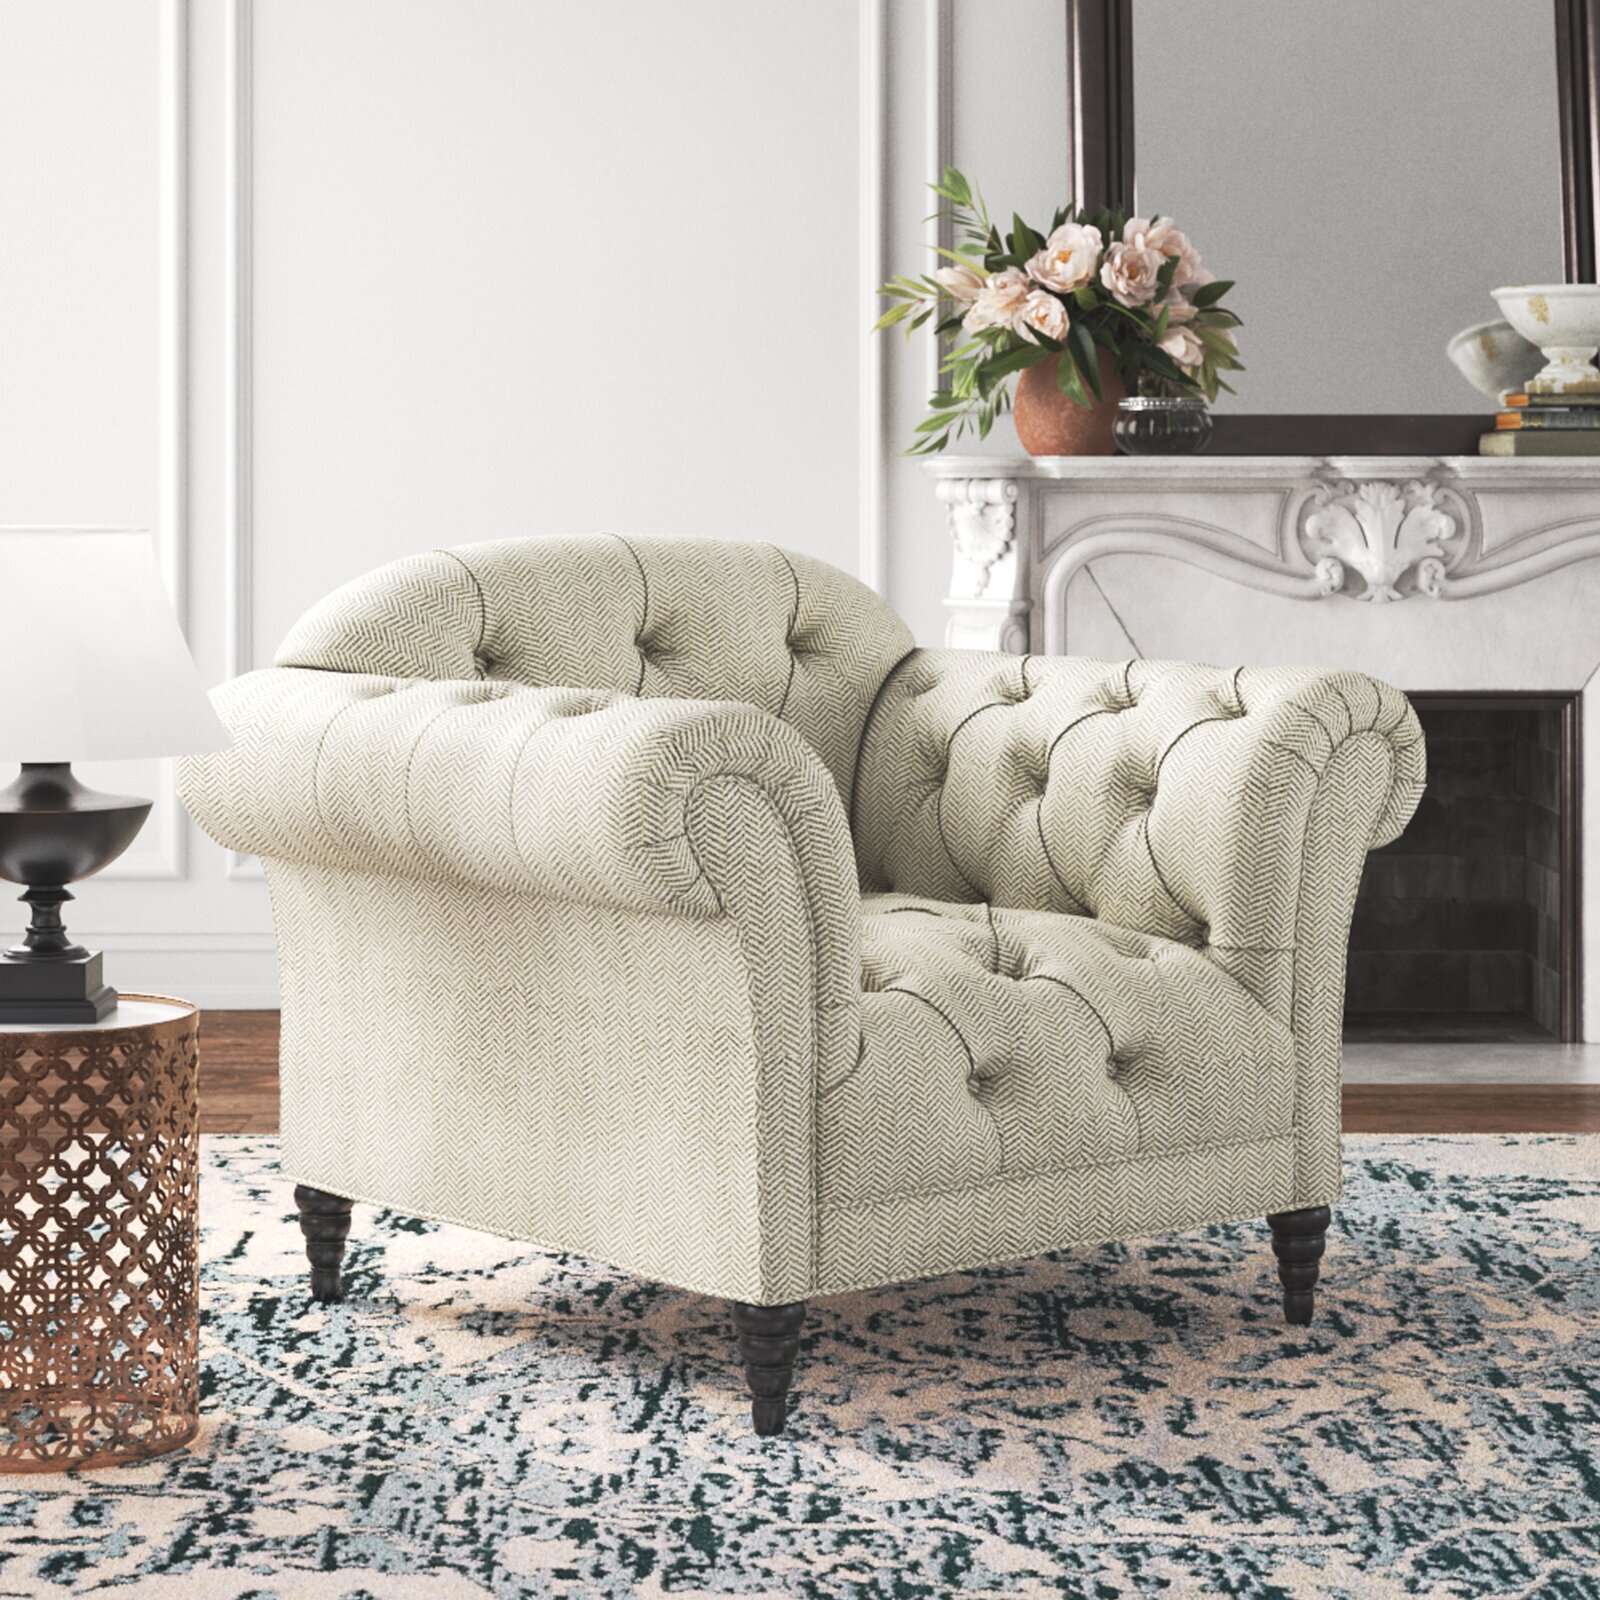 French country oversized armchair